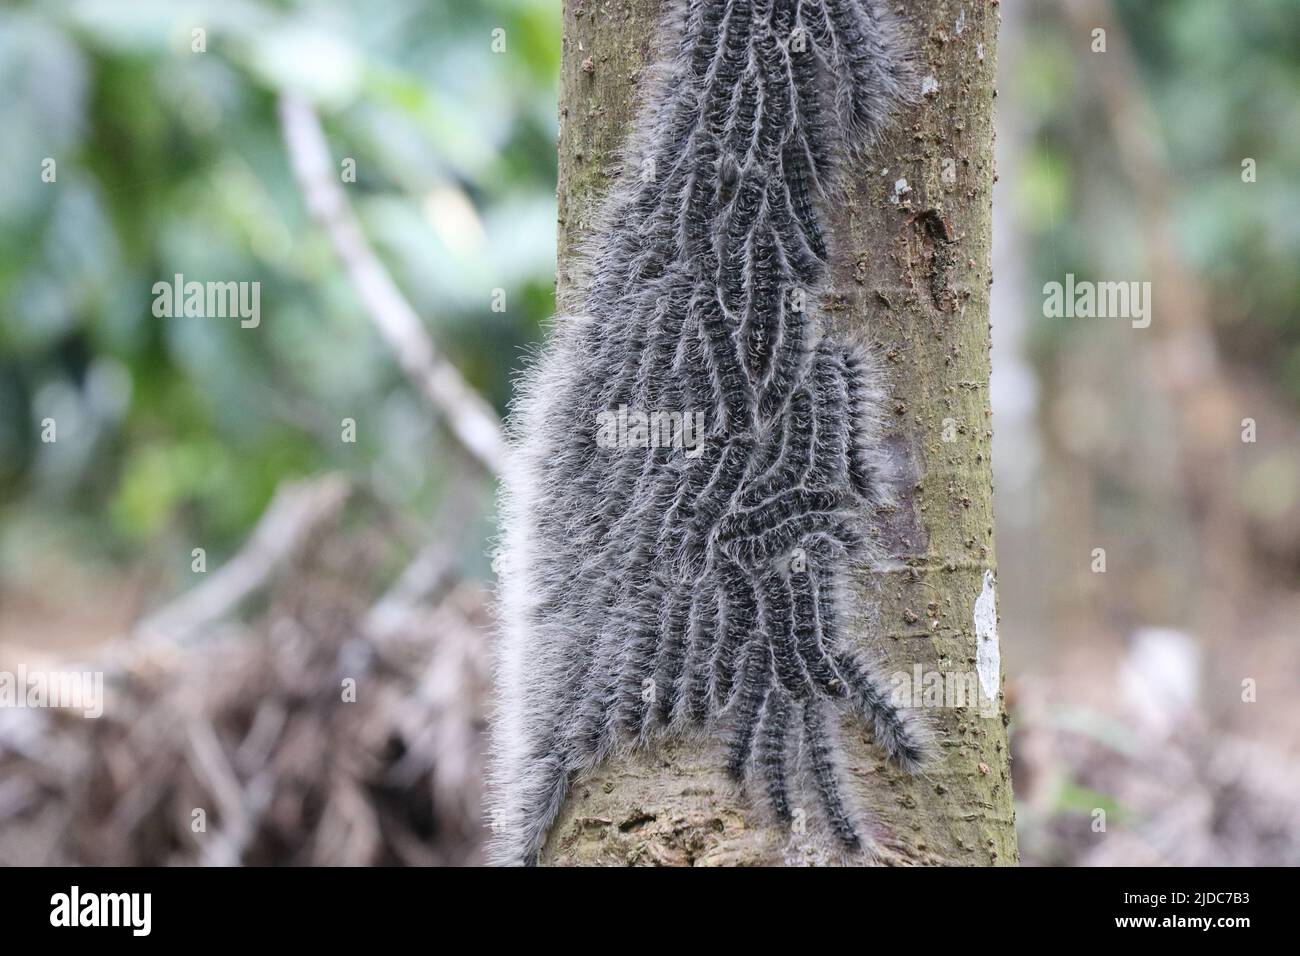 Group of caterpillars on the bark of a tree Stock Photo